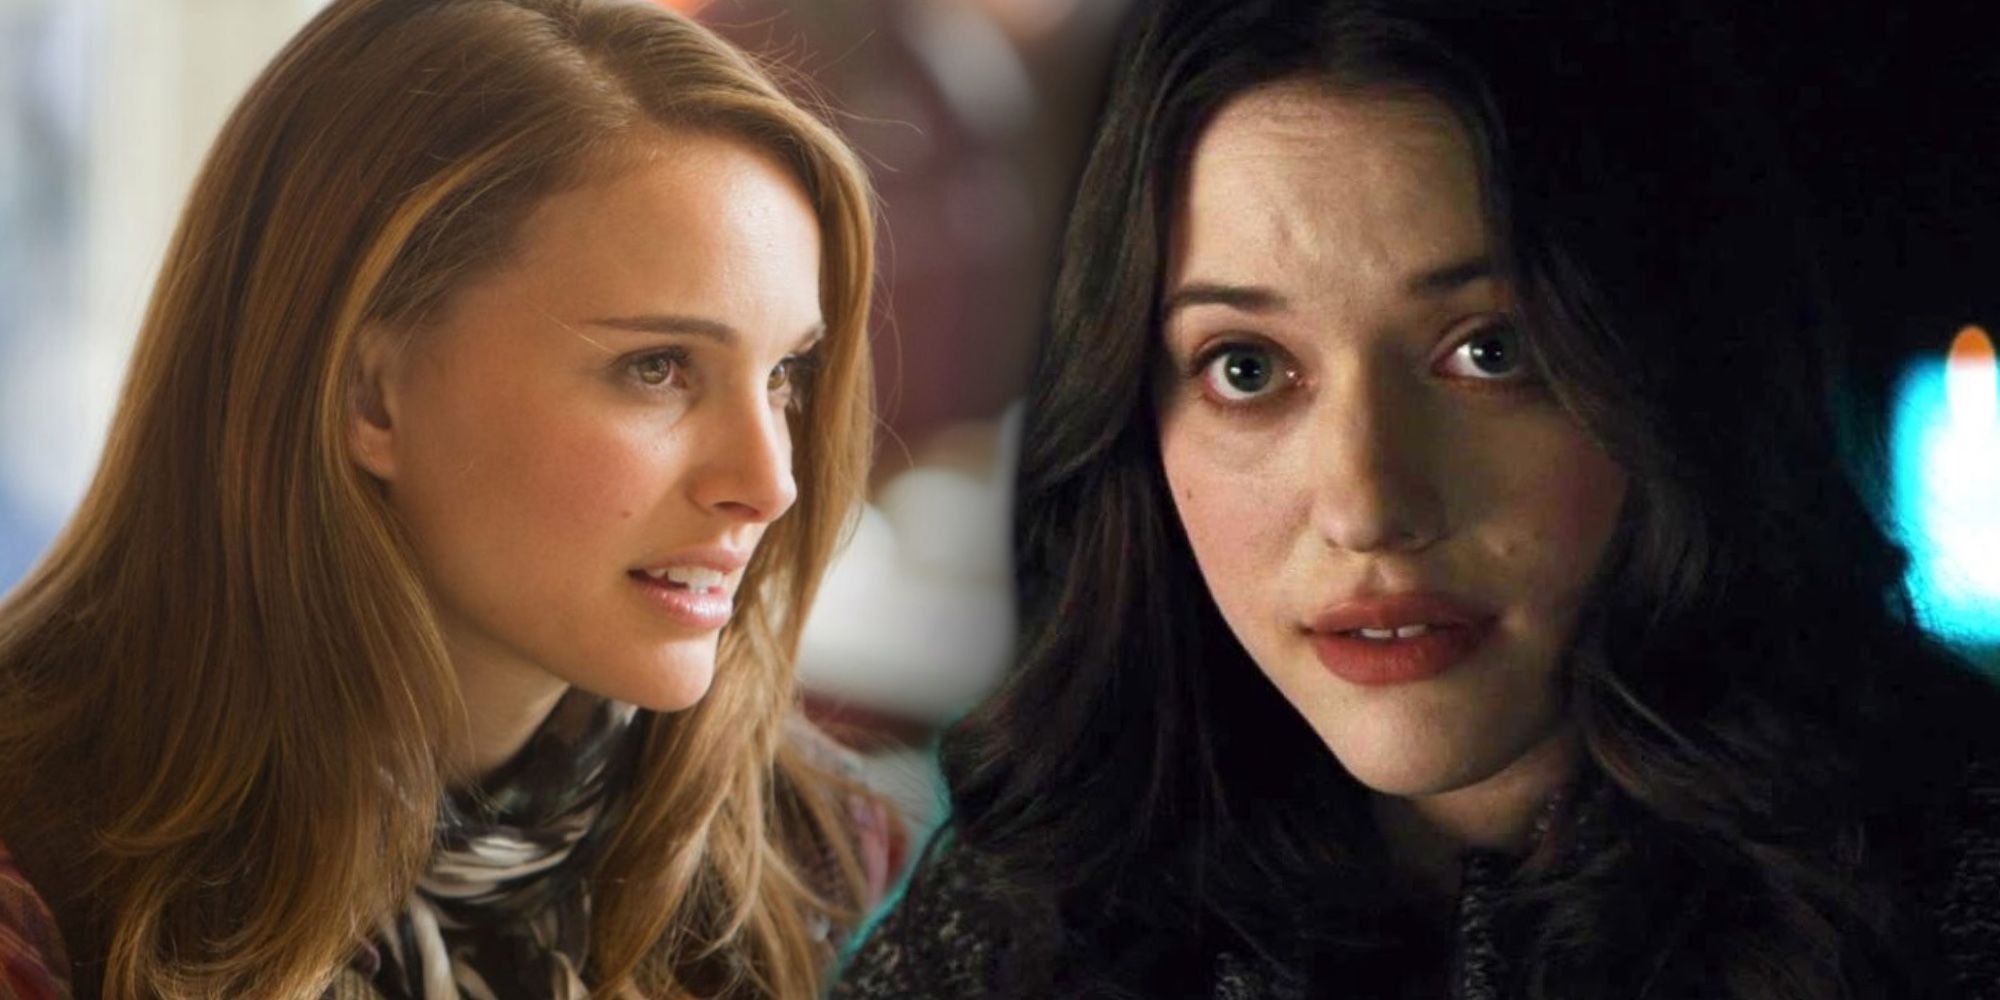 Natalie Portman as Jane Foster and Kat Dennings as Darcy Lewis in the MCU